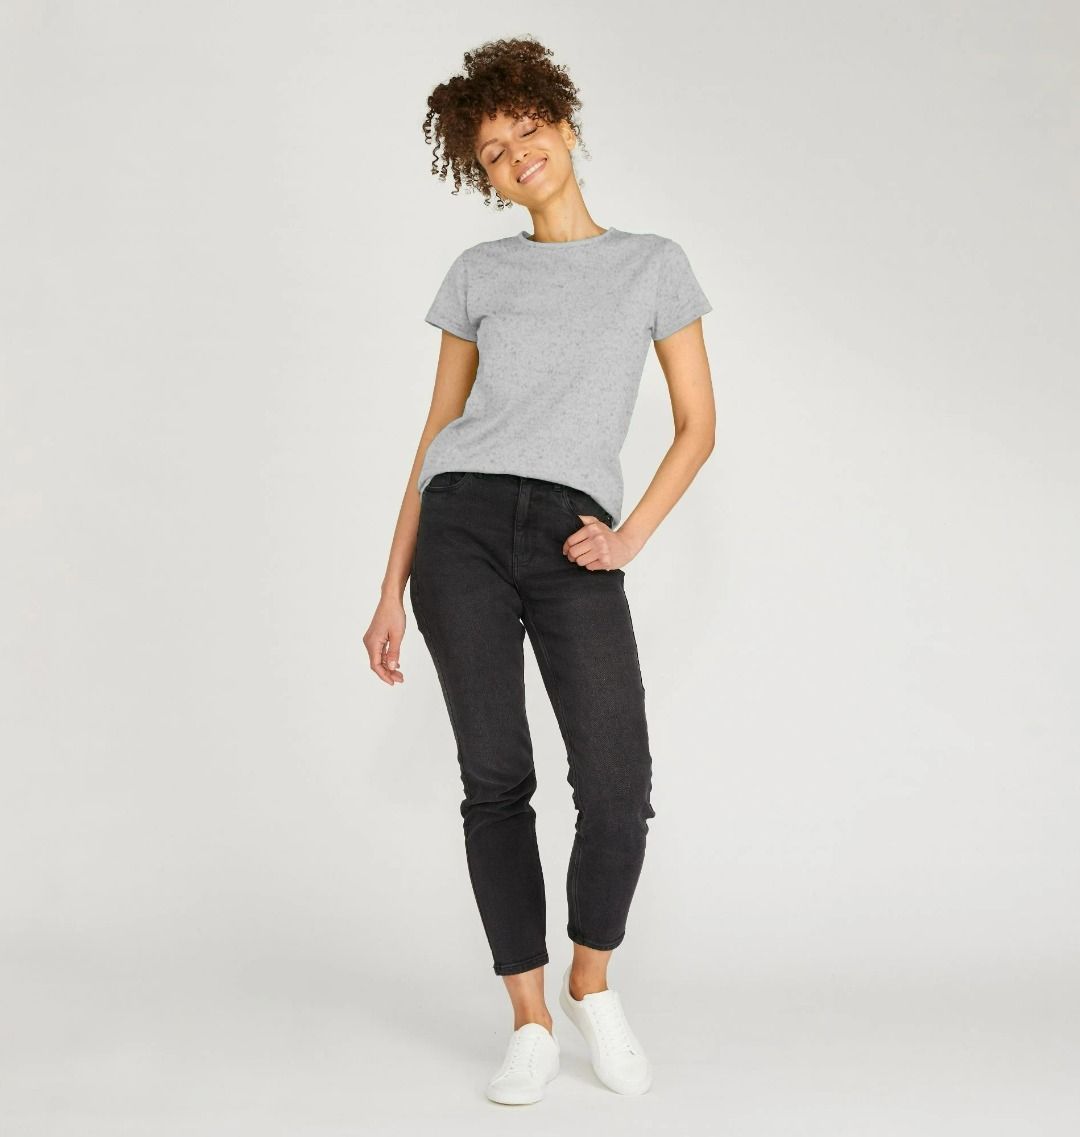 Women's sustainable essential t-shirt